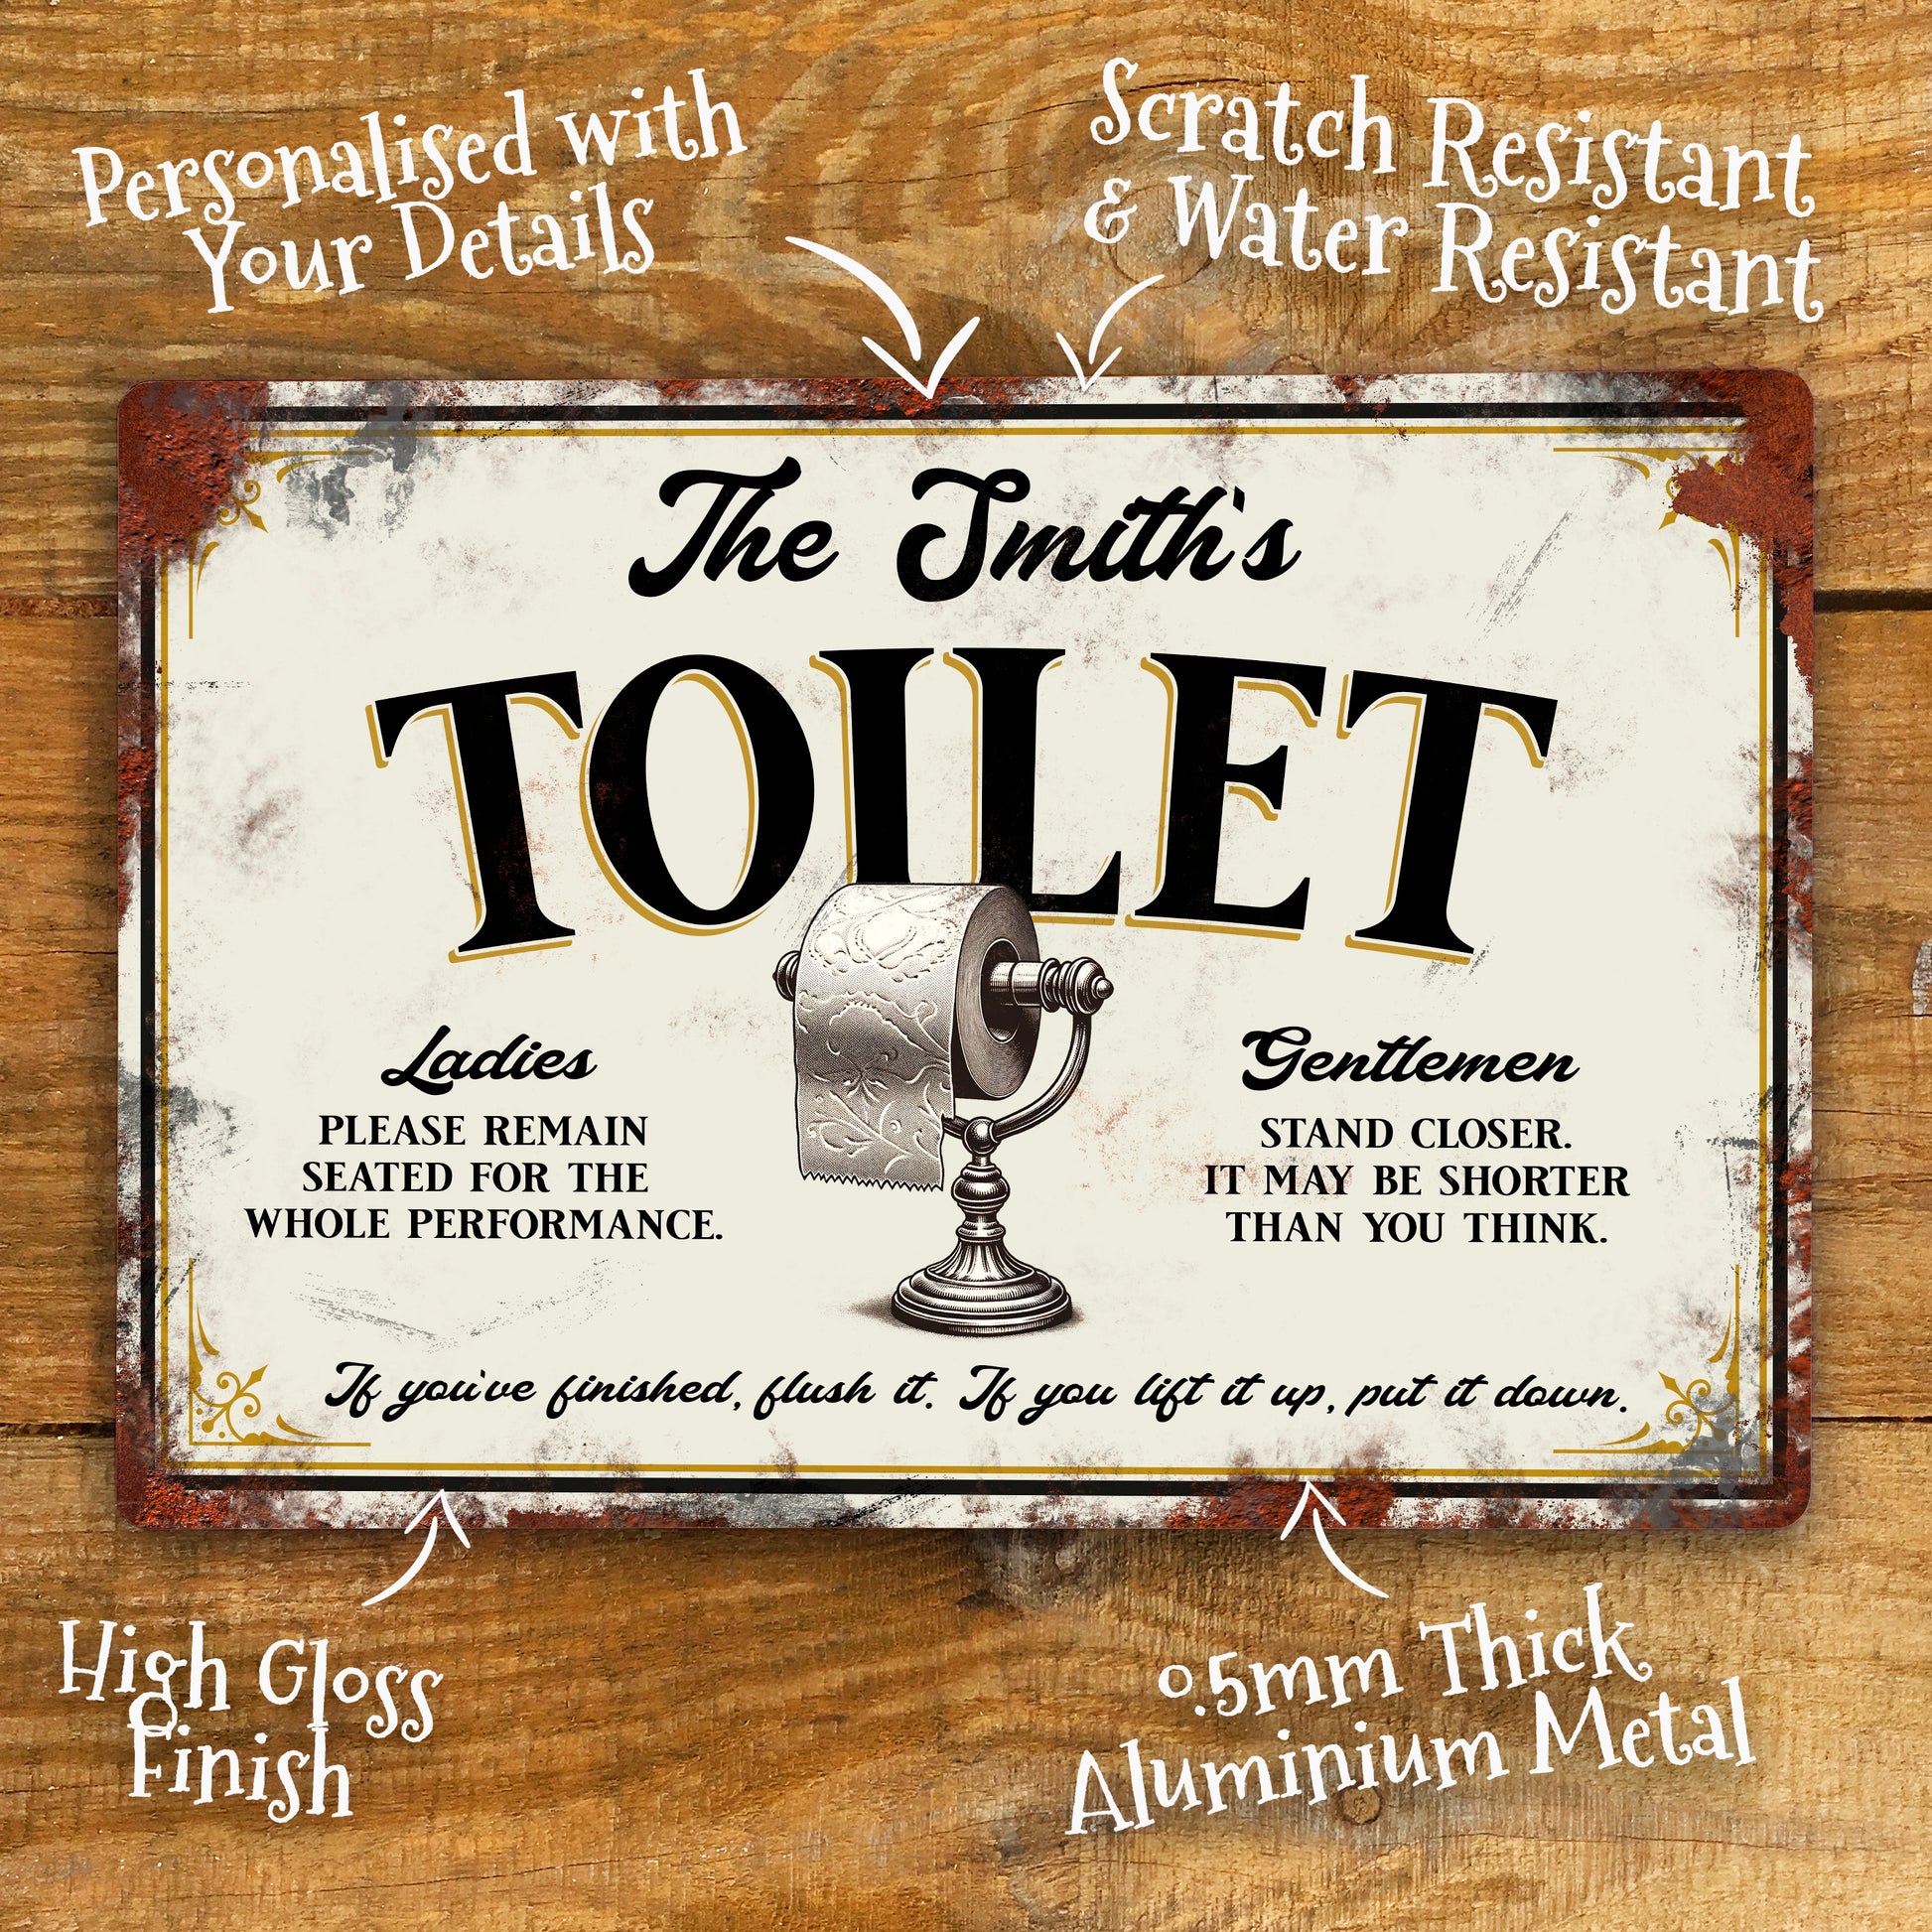 Personalised Toilet Victorian style Metal Sign with rusted effect showing measurements and details